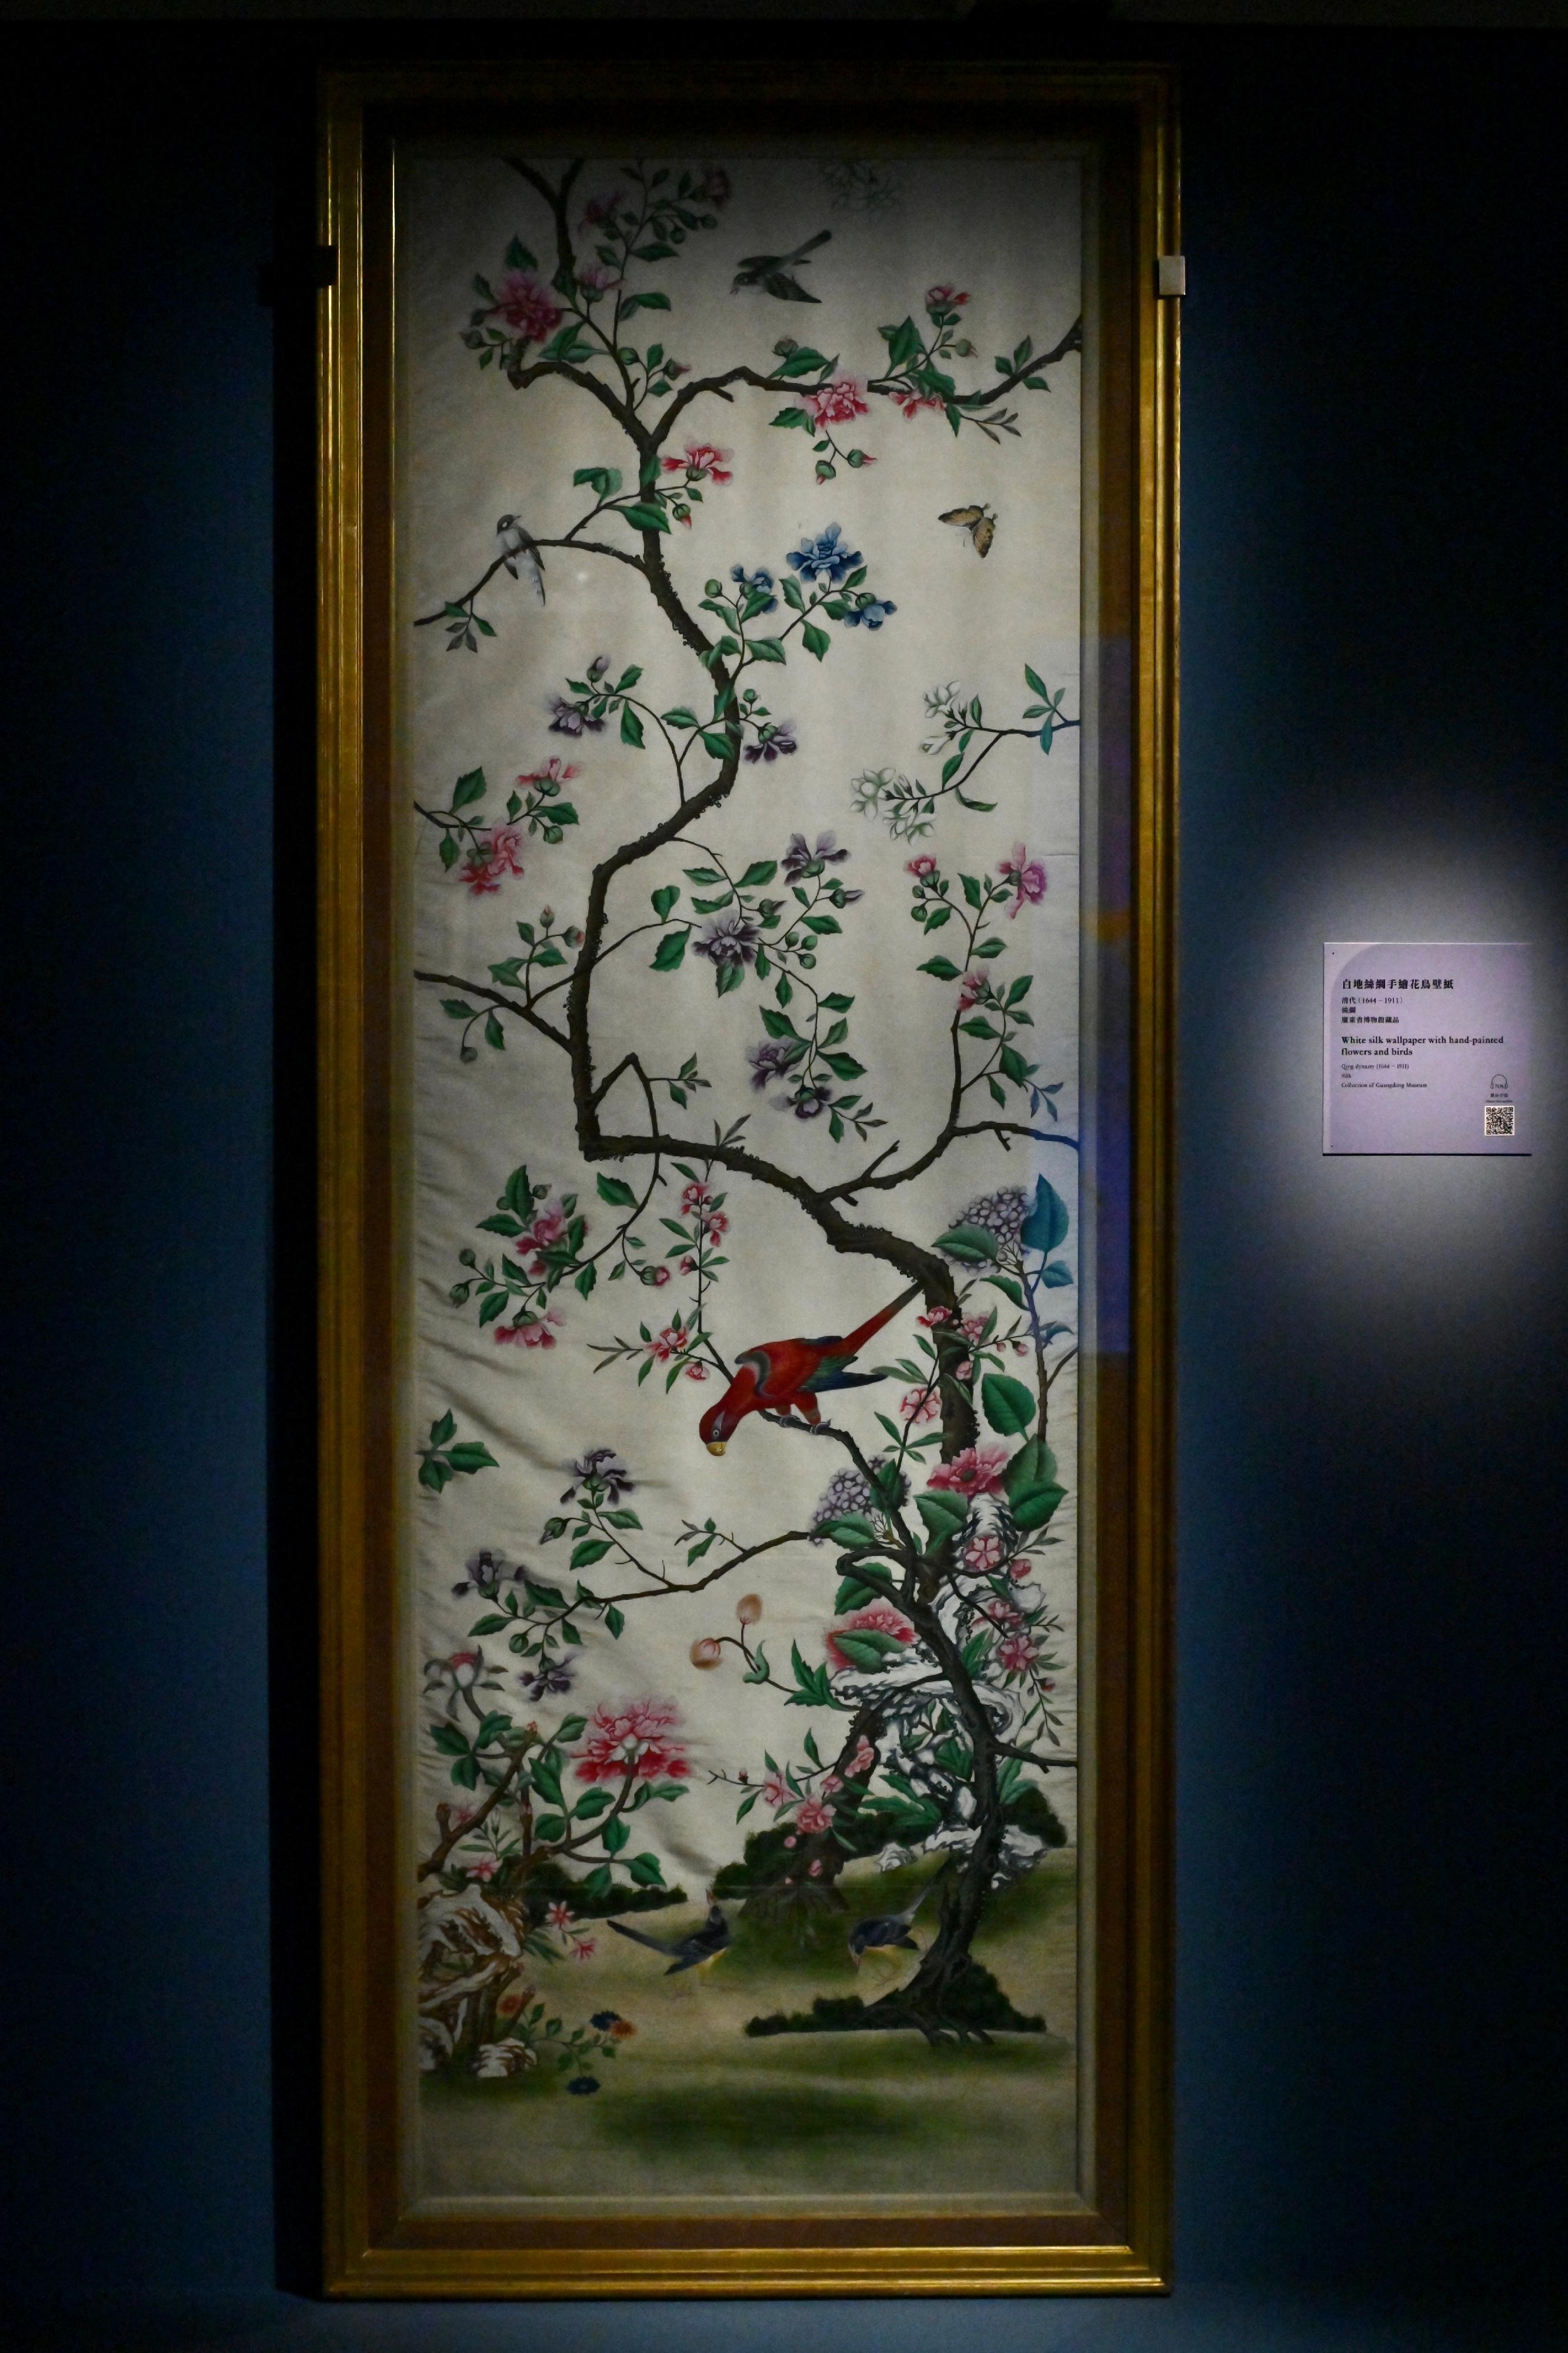 The opening ceremony of the Hong Kong stop of the touring exhibition "A Tale of Three Cities: Guangdong-Hong Kong-Macao Greater Bay Area and Export of Silk Products in the Ming and Qing Dynasties" was held today (September 7) at the Hong Kong Museum of Art. Picture shows a white silk wallpaper with hand-painted flowers and birds from the Qing dynasty, which is a grade-three national treasure. (Collection of Guangdong Museum)
